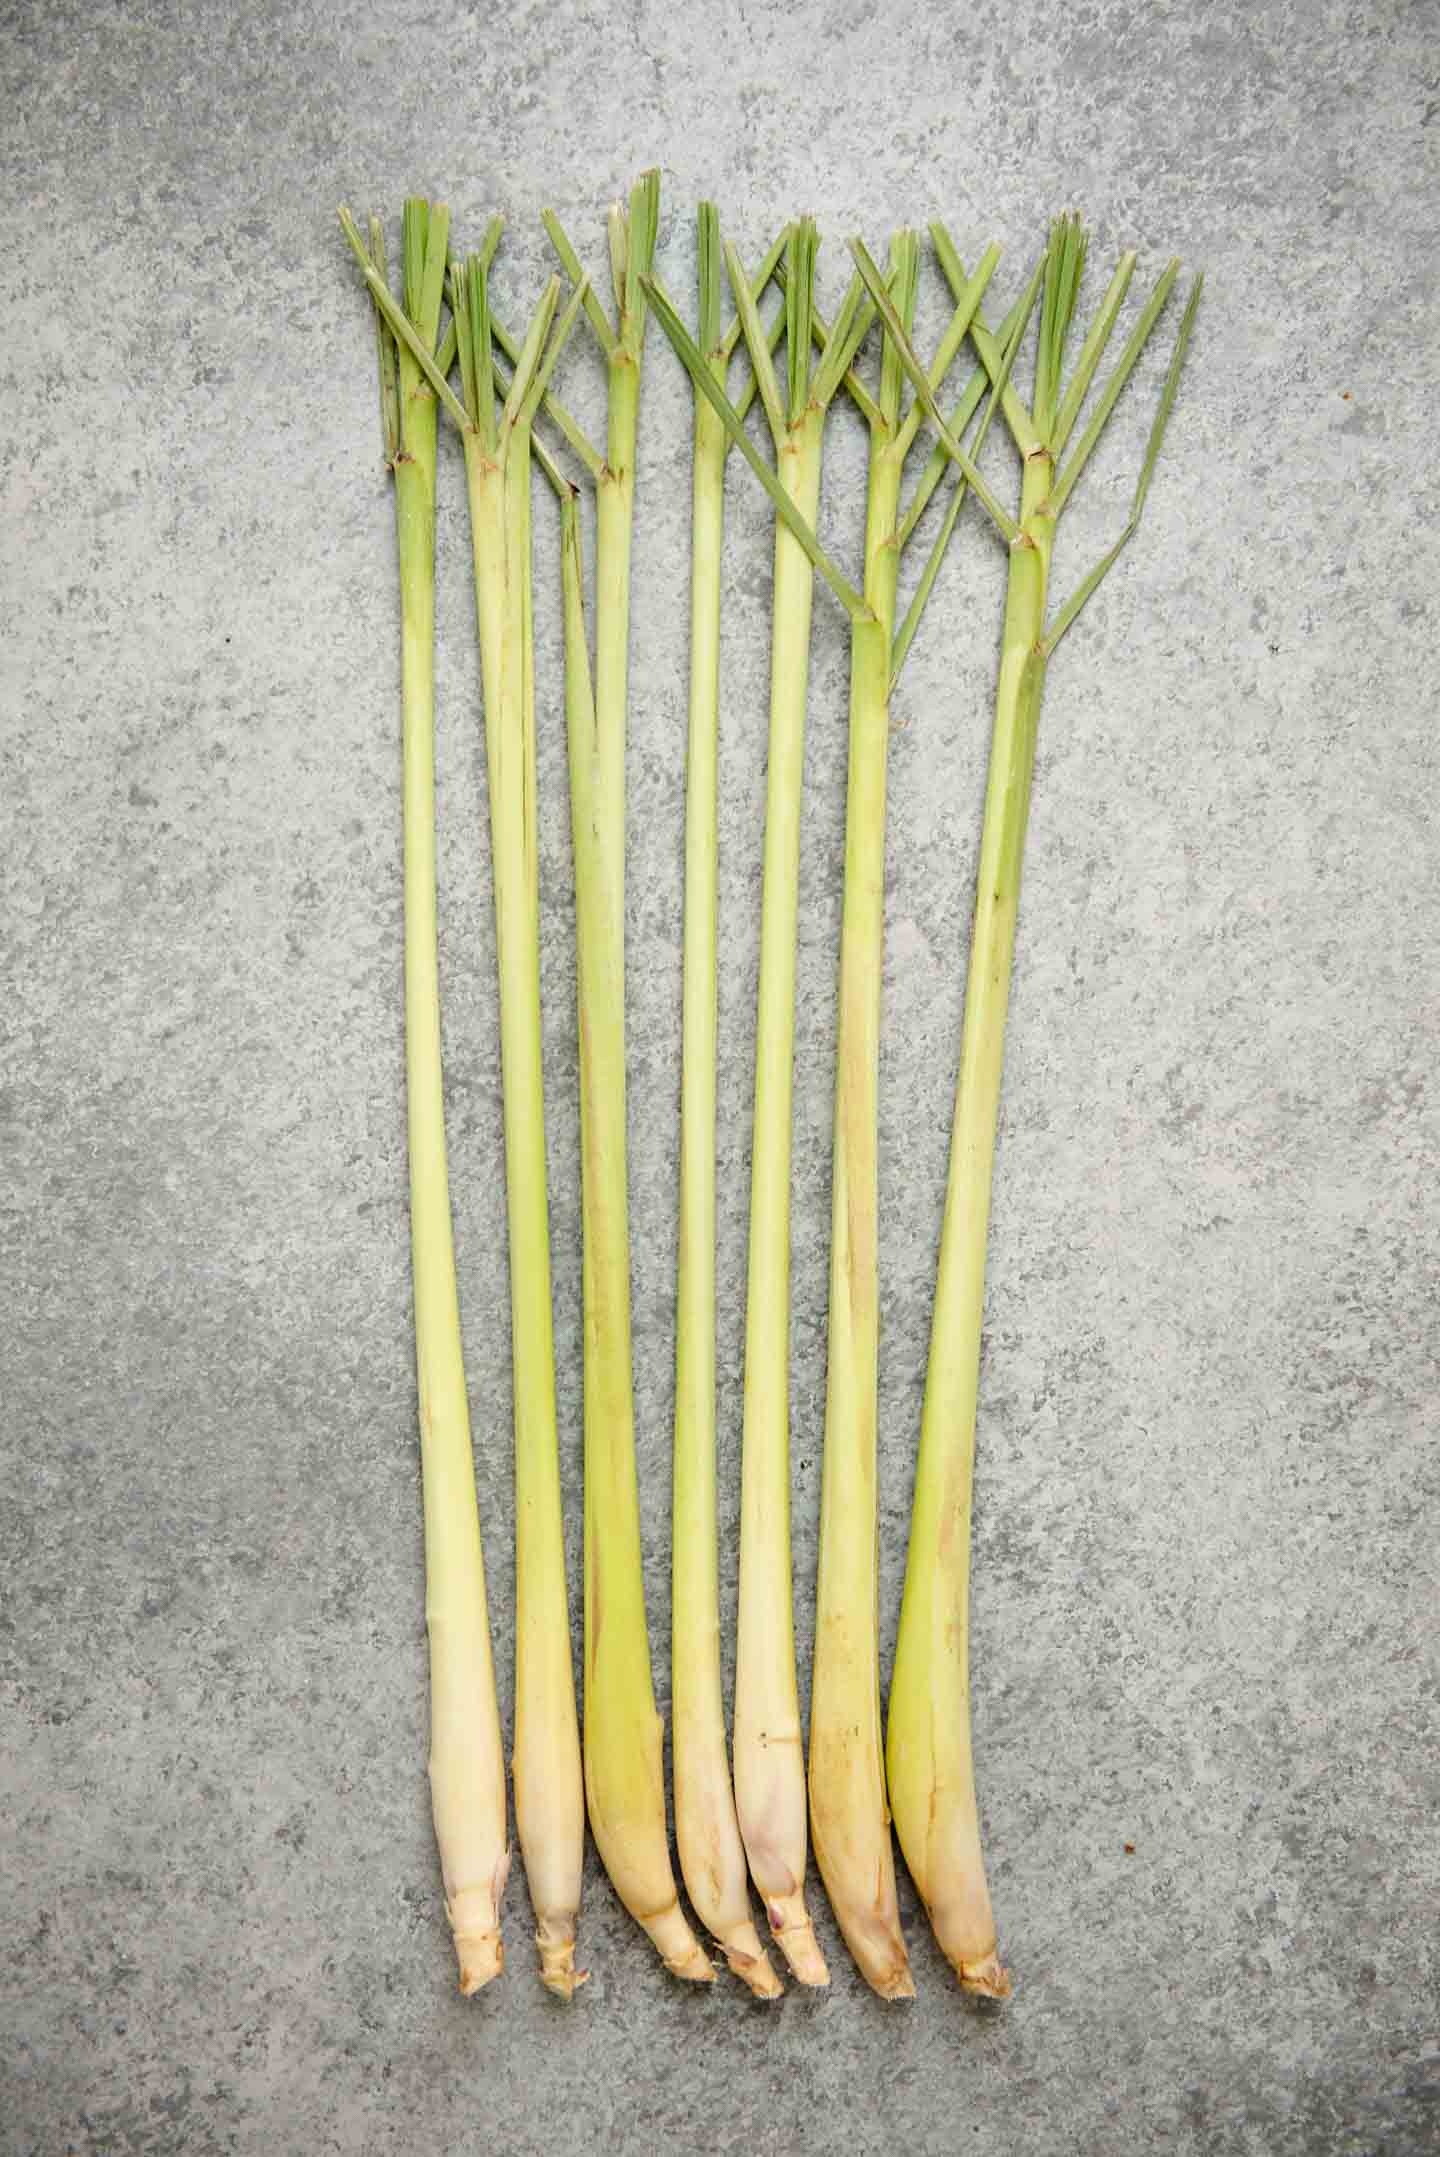 Cooking with lemongrass, Healthy recipes, Lemongrass flavor, Exciting flavors, 1440x2160 HD Phone